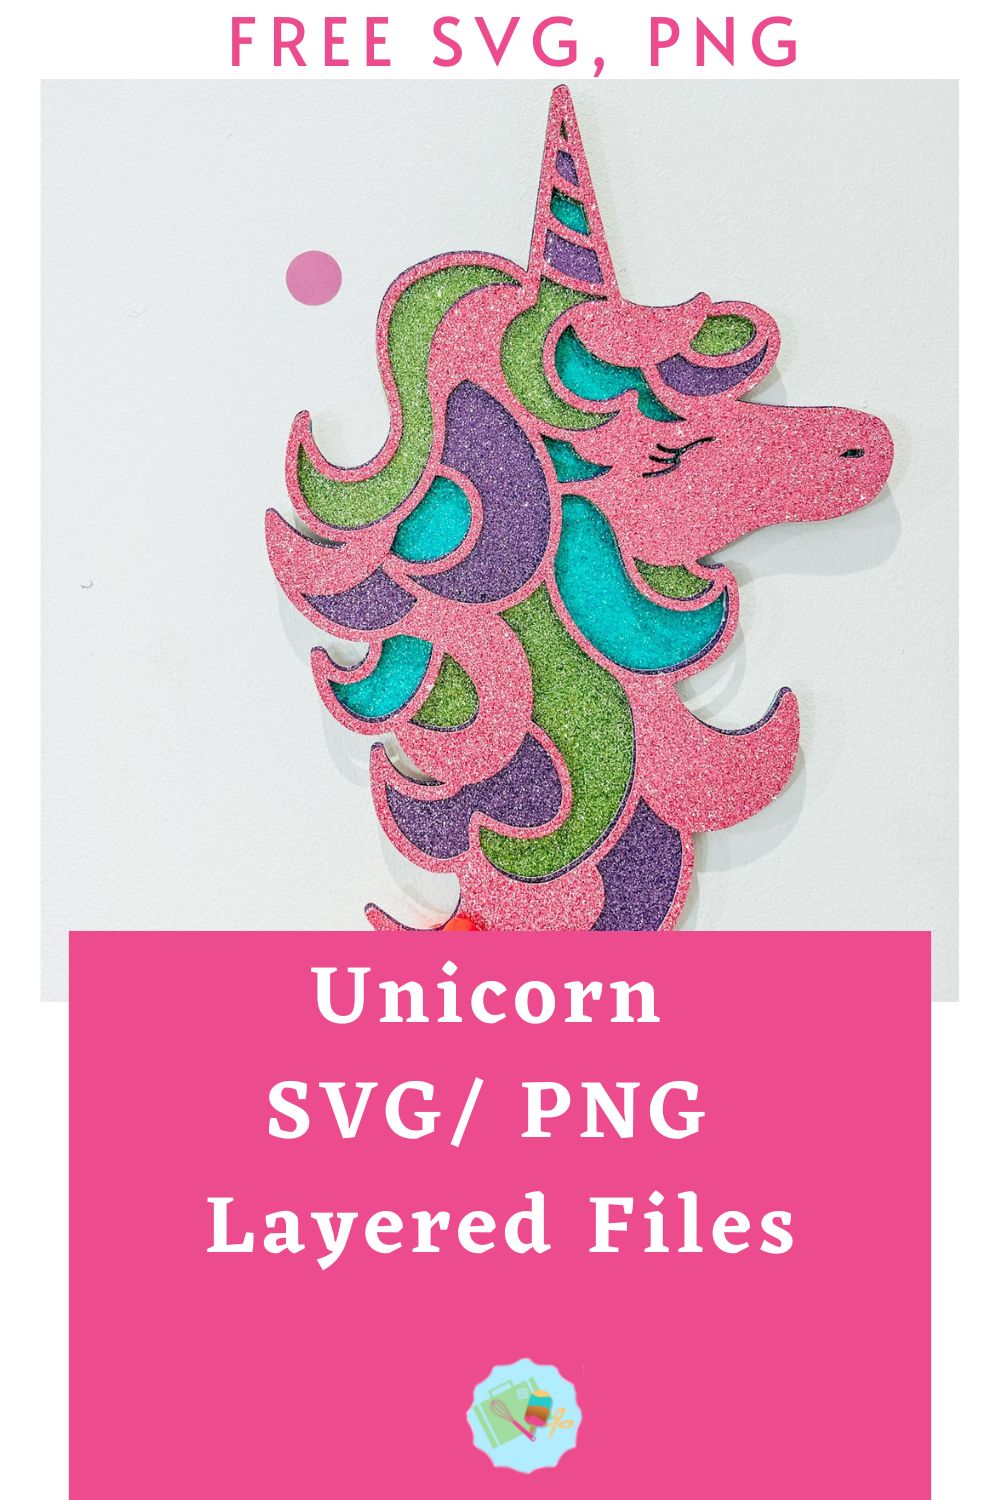 Free SVG PNG Unicorn SVG PNG for Cricut, Glowforge and Silhouette